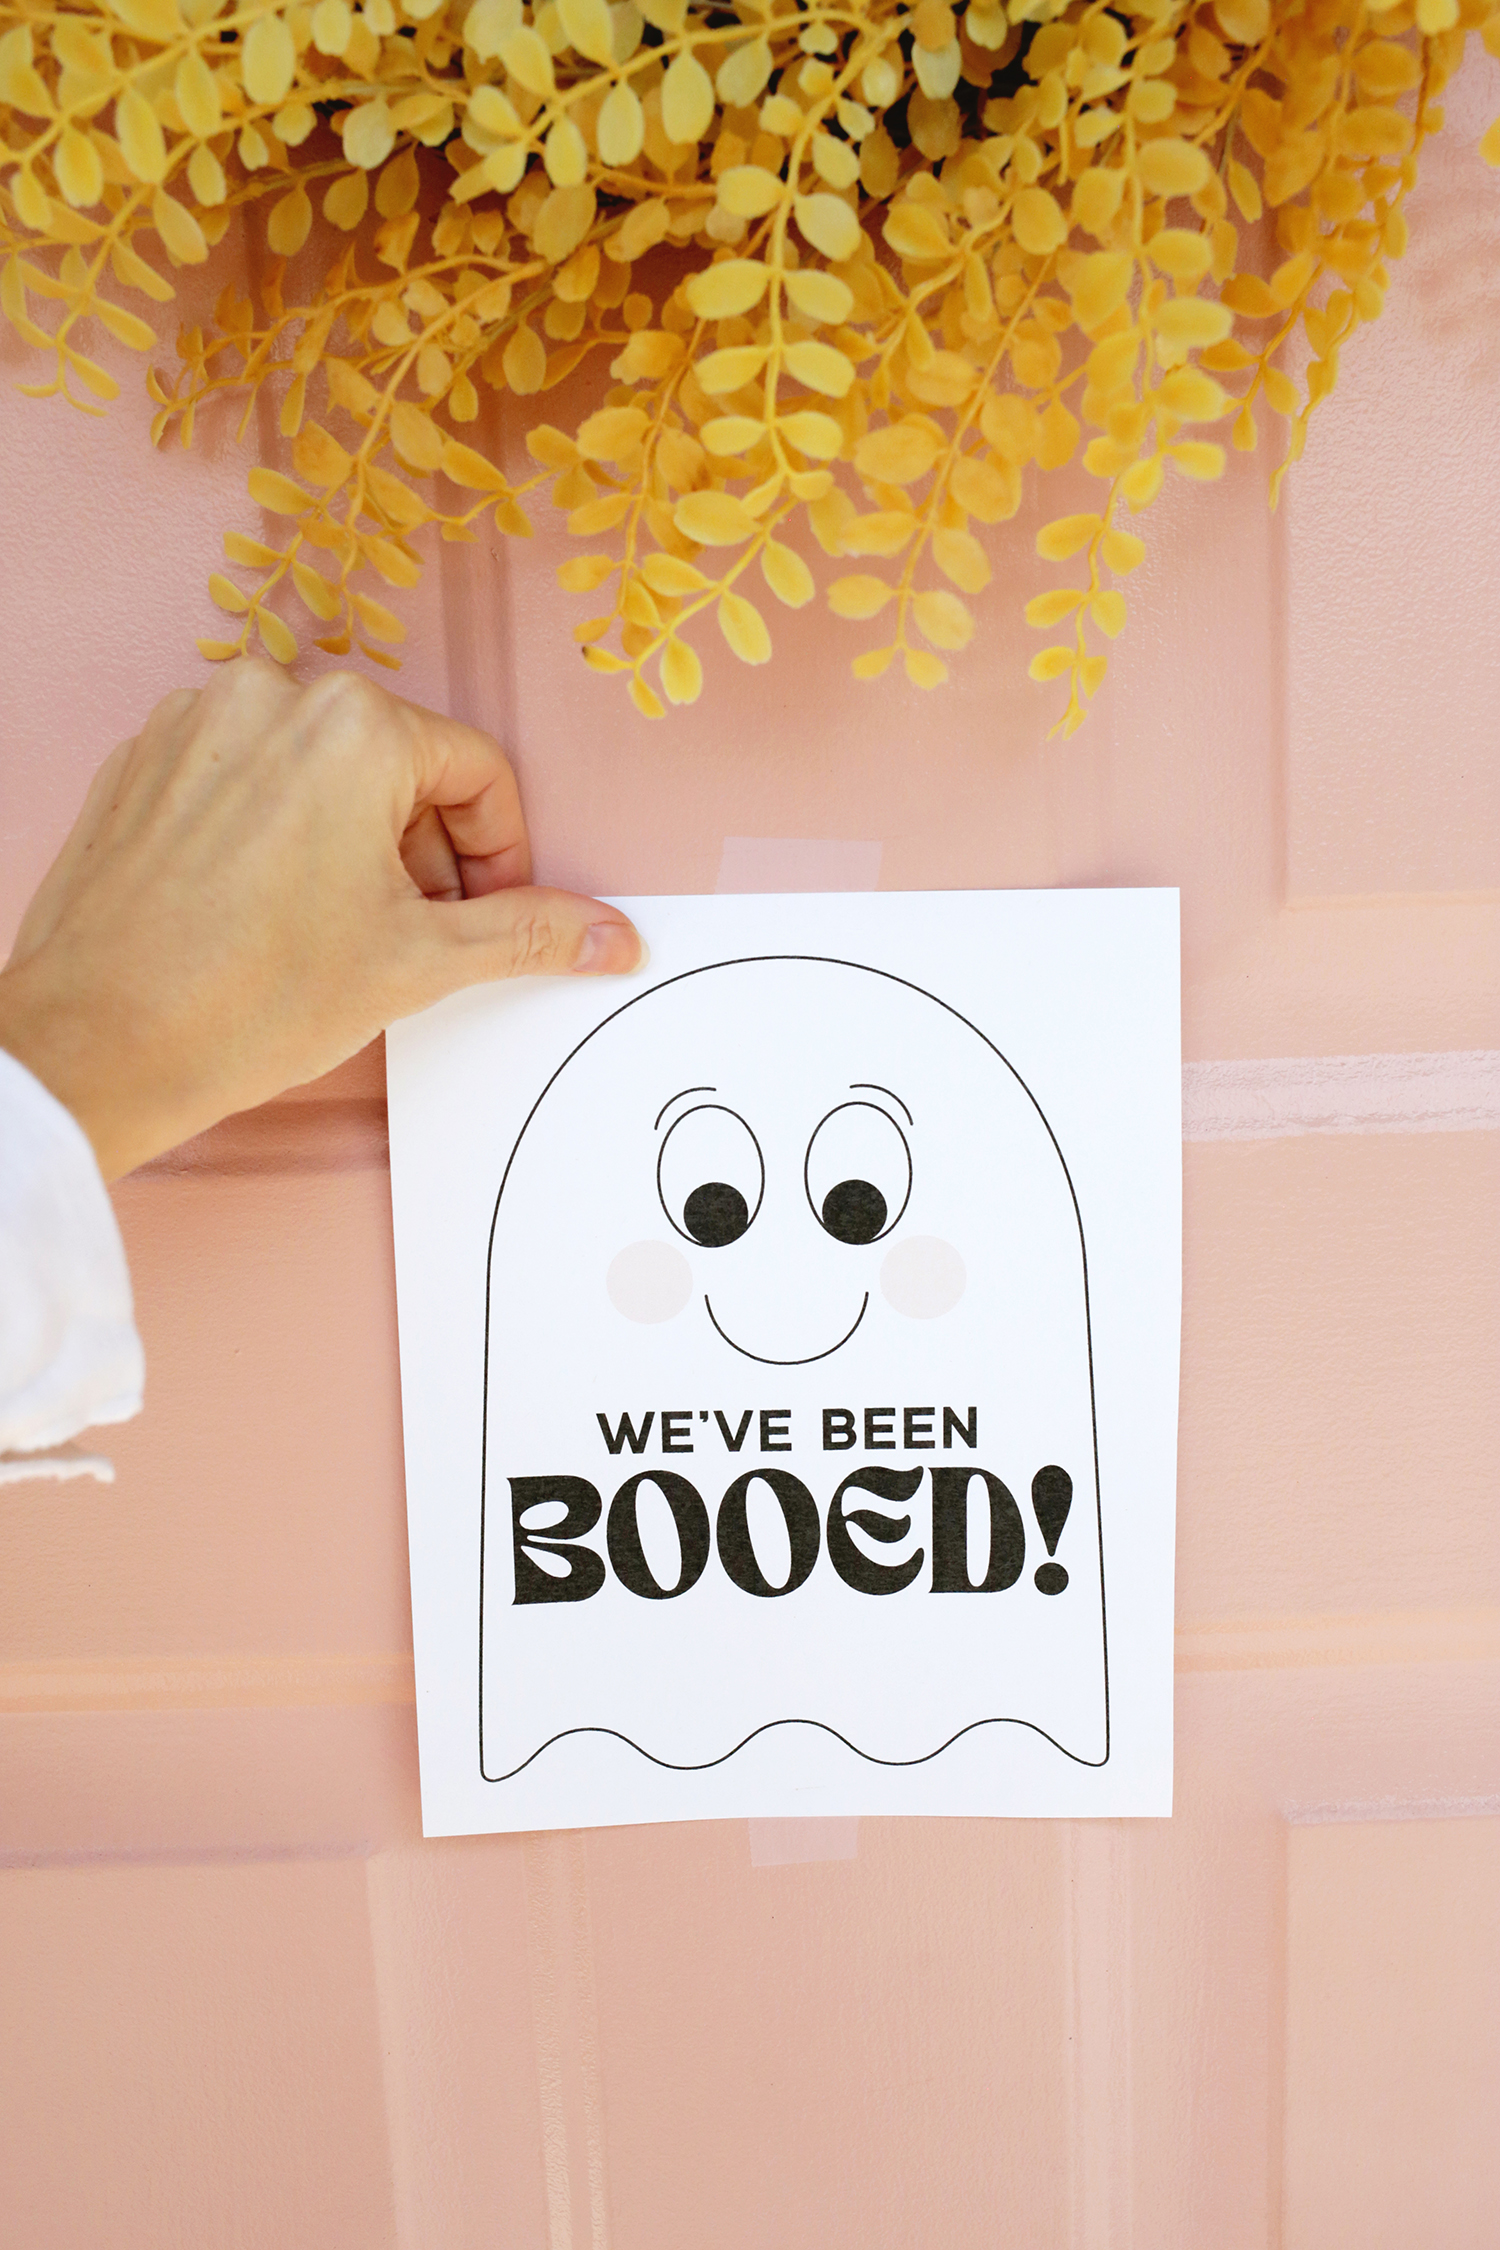 you've been booed free printable